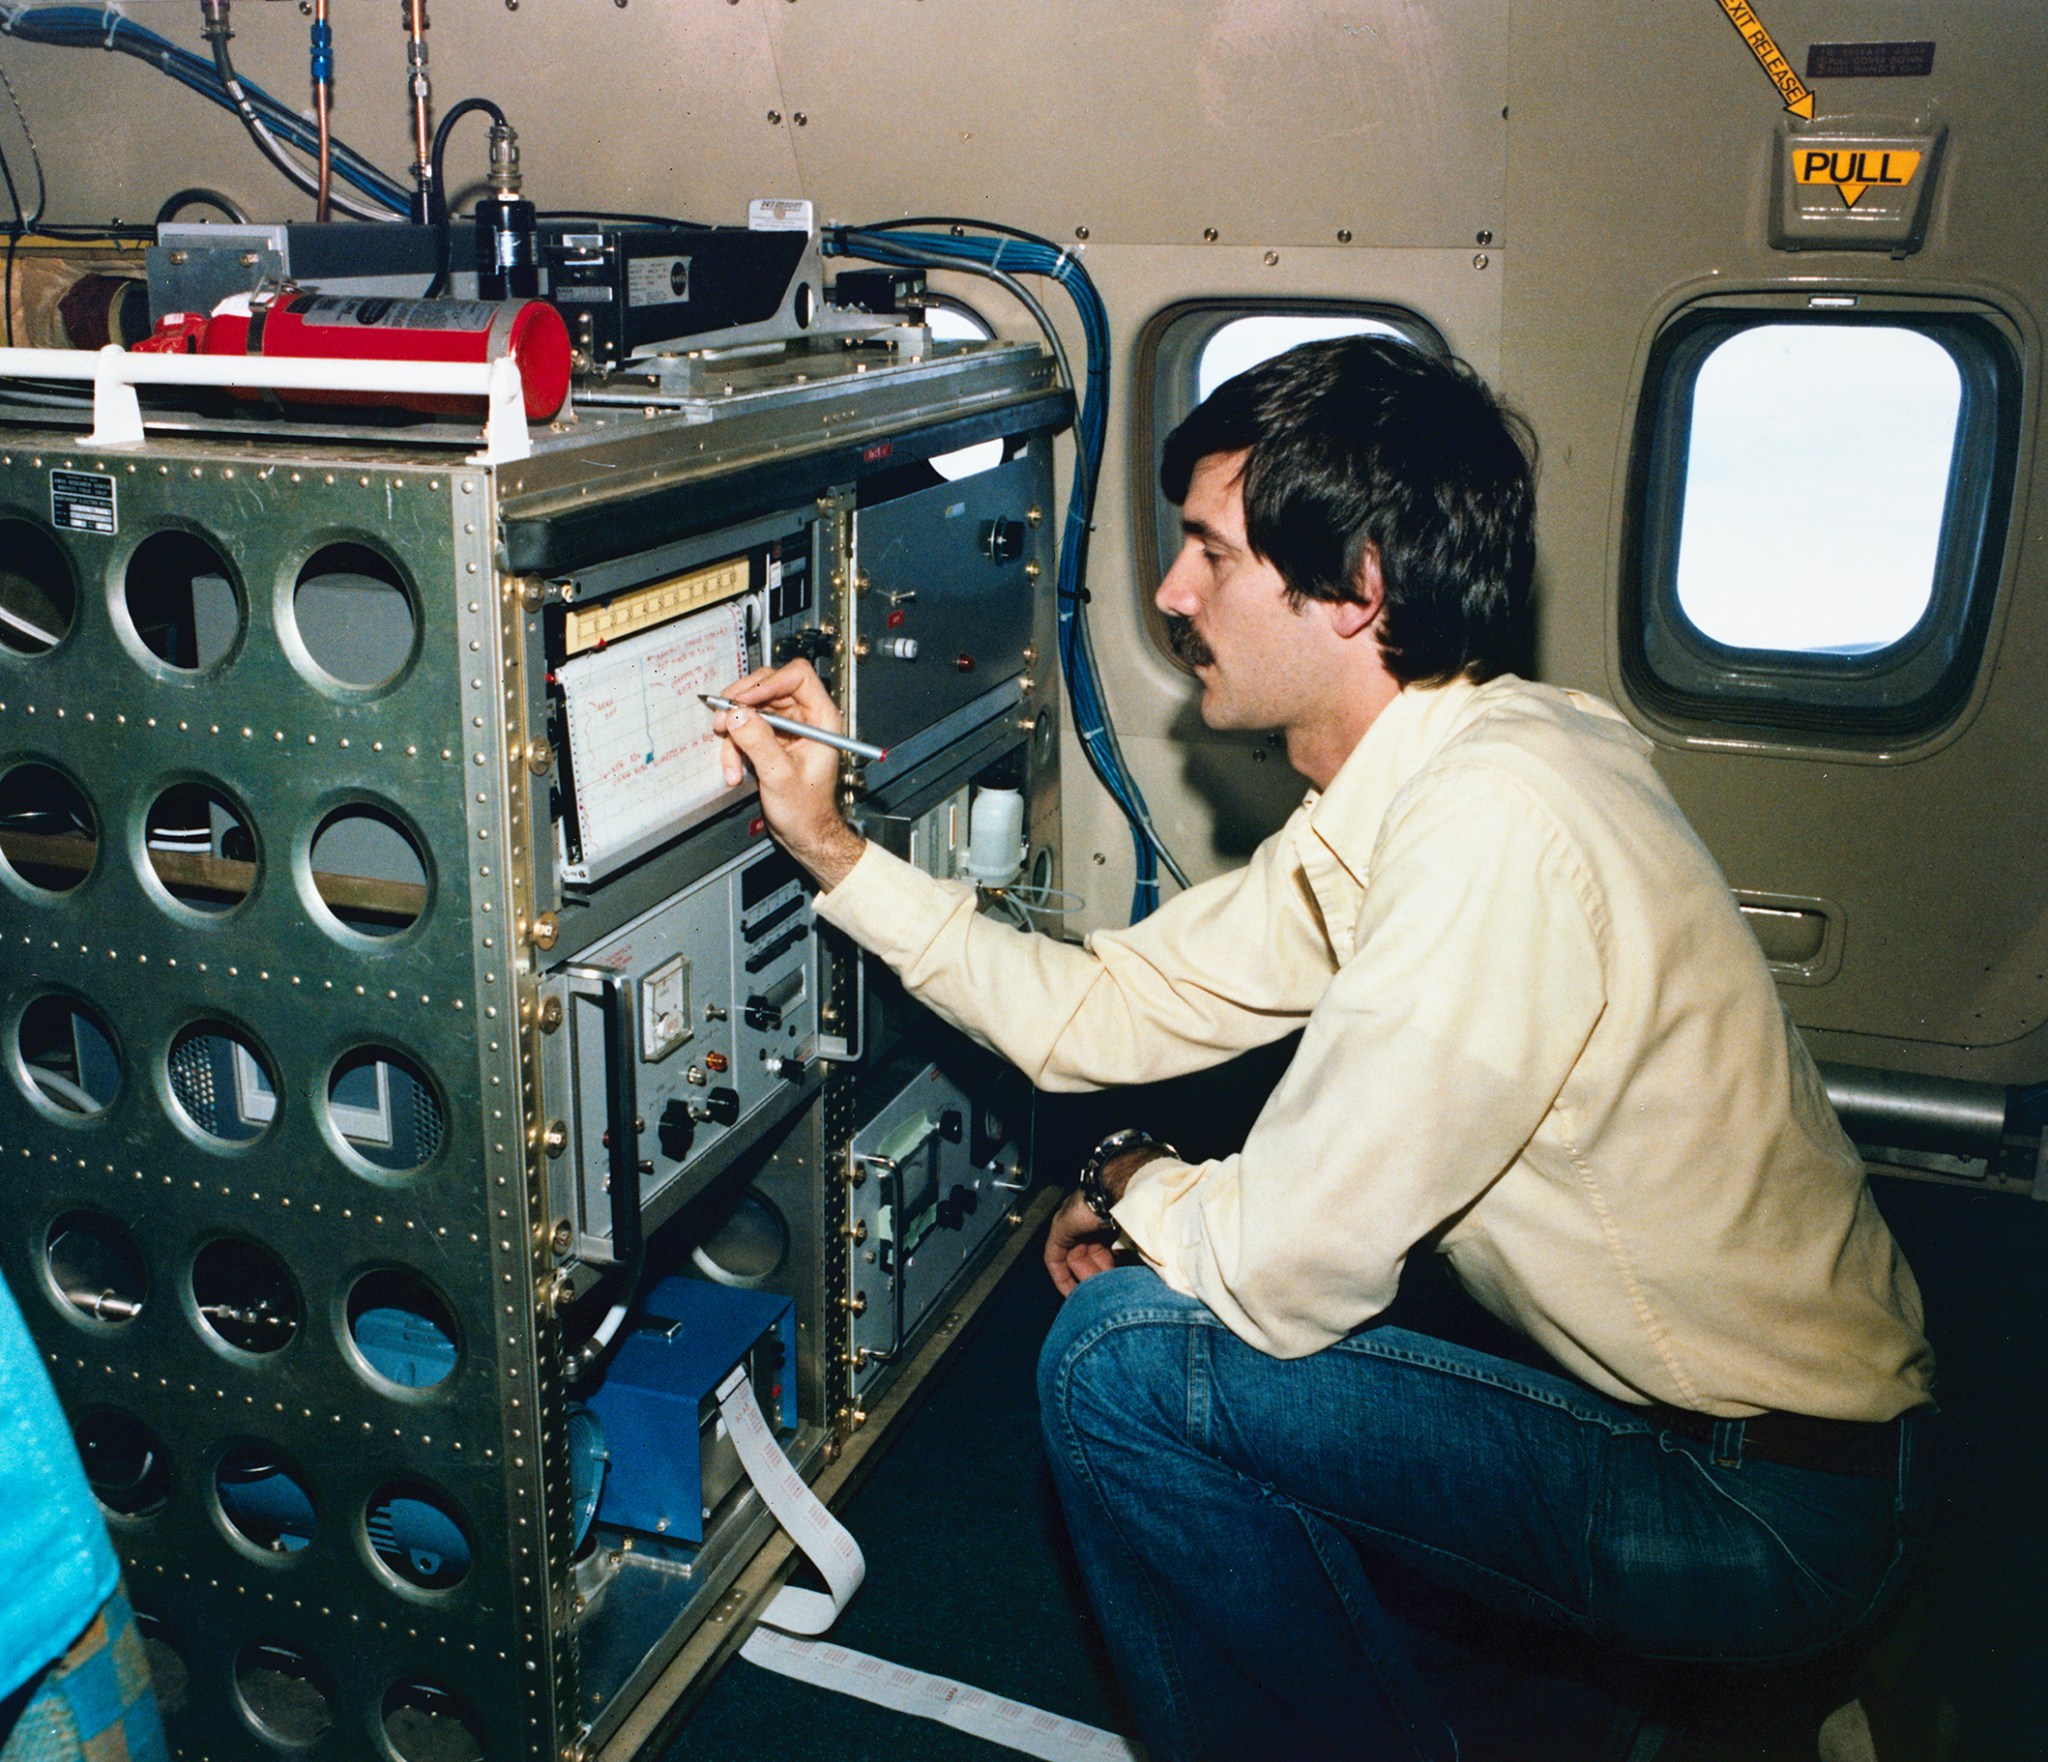 A research scientists writes data readings on an equipment rack aboard a researcher aircraft .